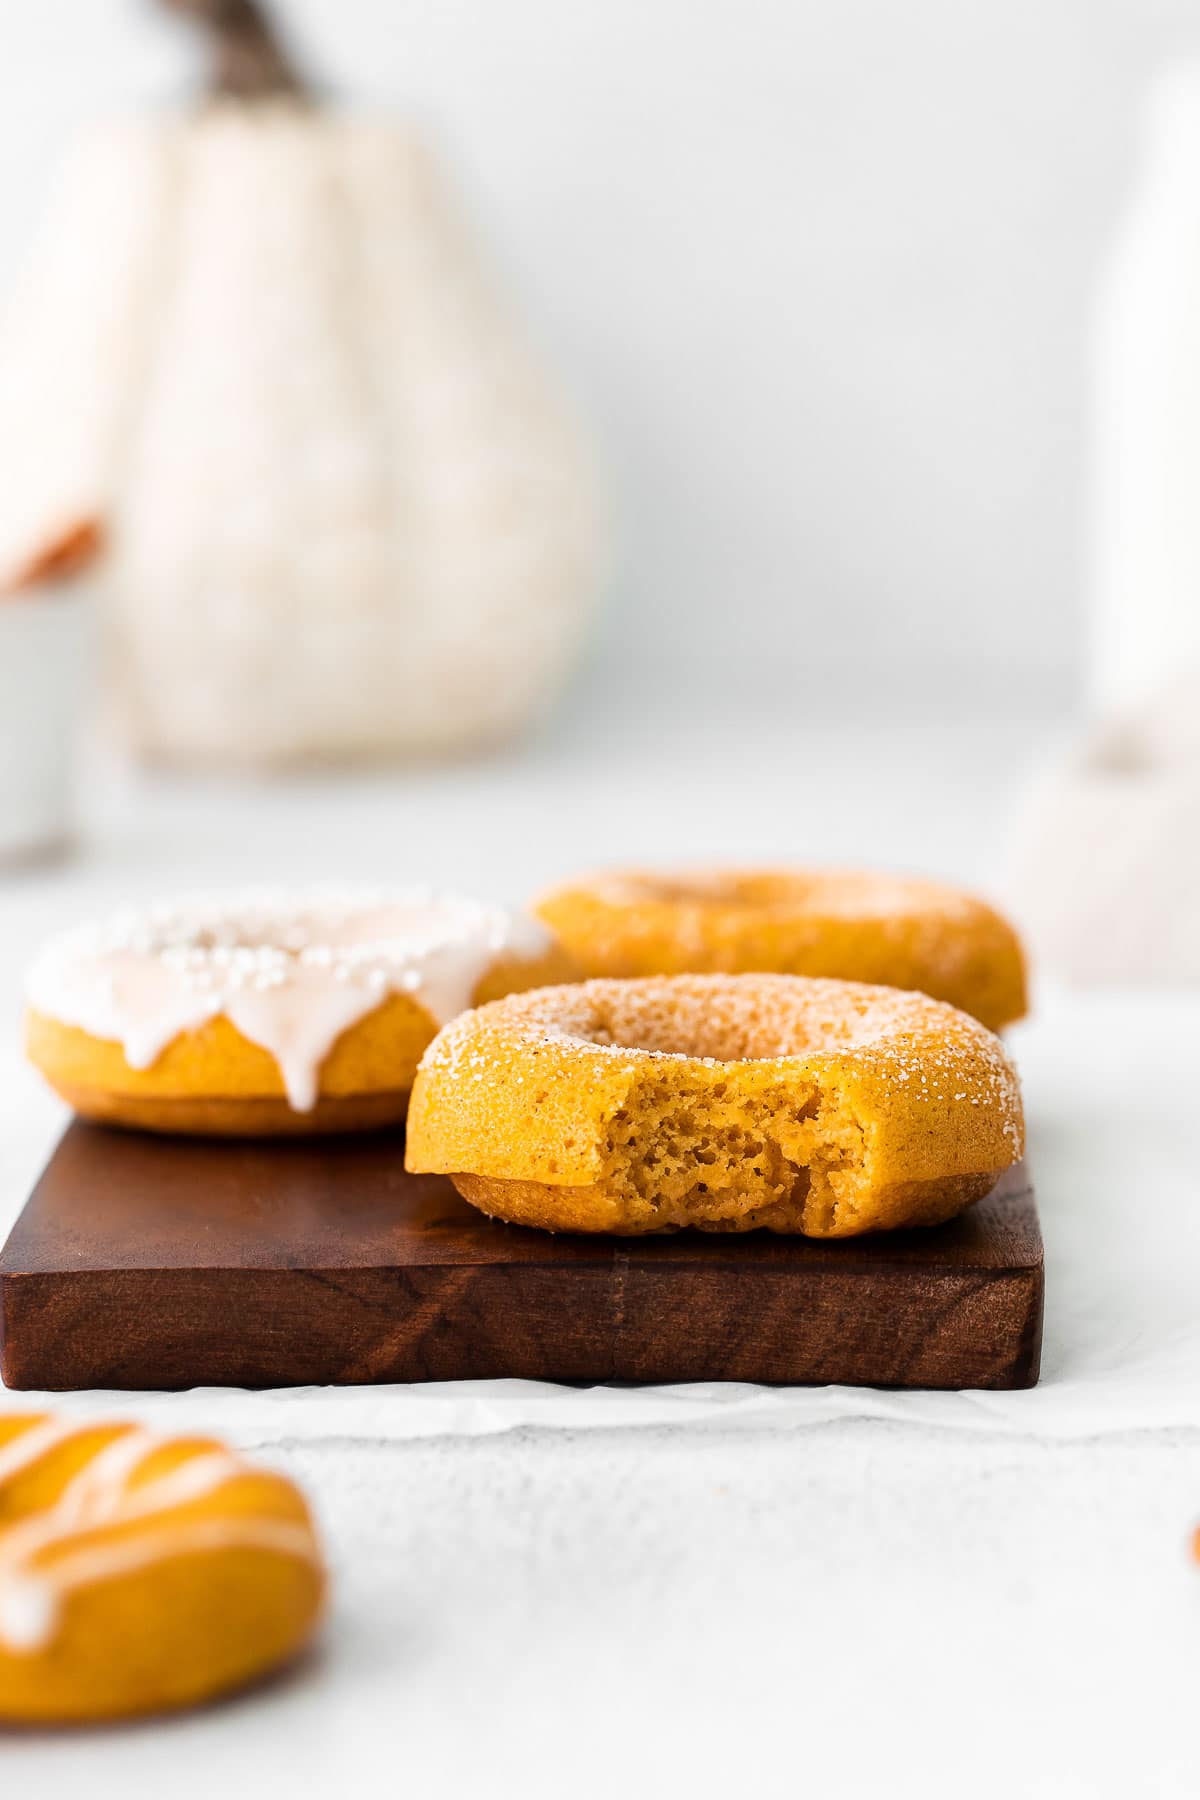 pumpkin spiced donut with a bite taken out on a wood board